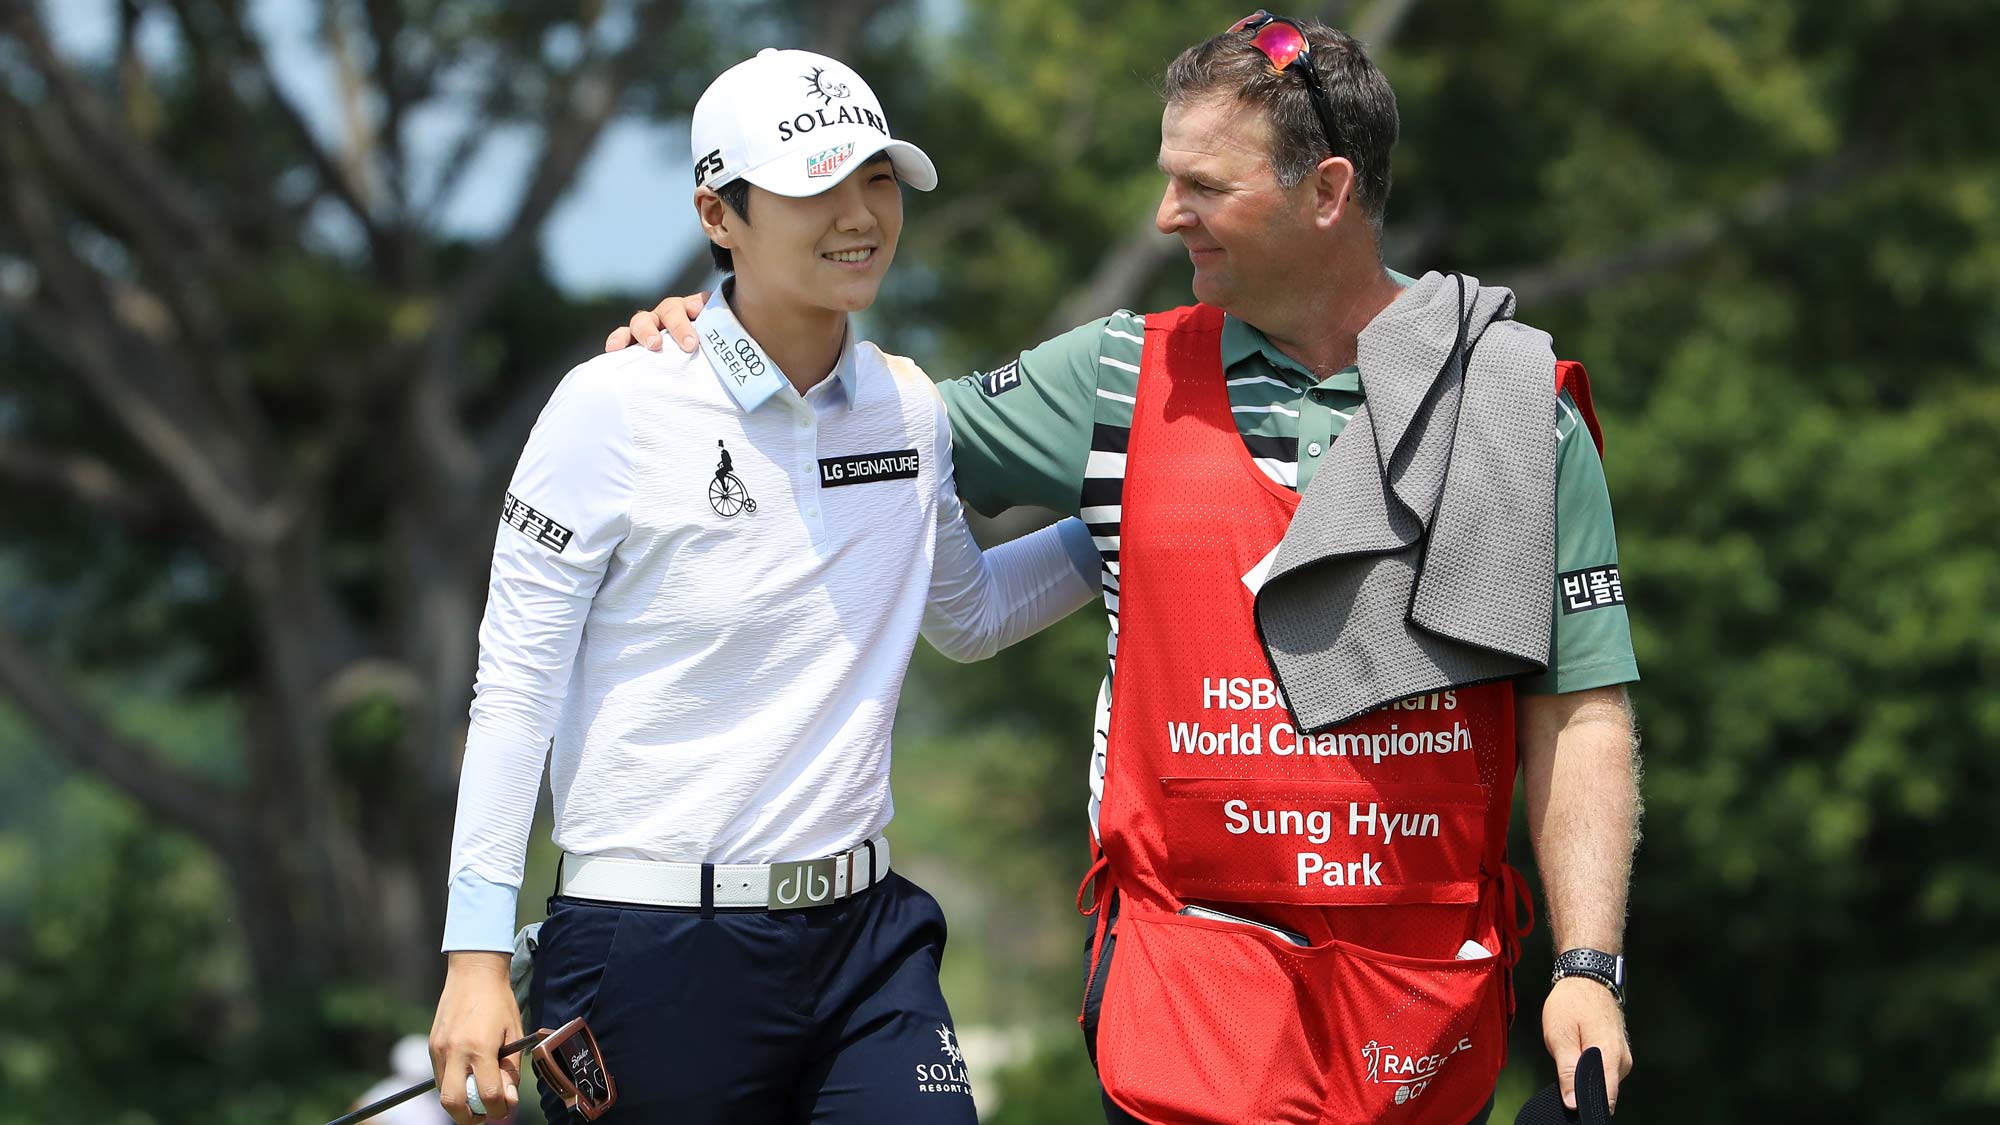 Sung Hyun Park of South Korea and her caddie, David Jones, celebrate after finishing on the 18th green during the final round of the HSBC Women's World Championship